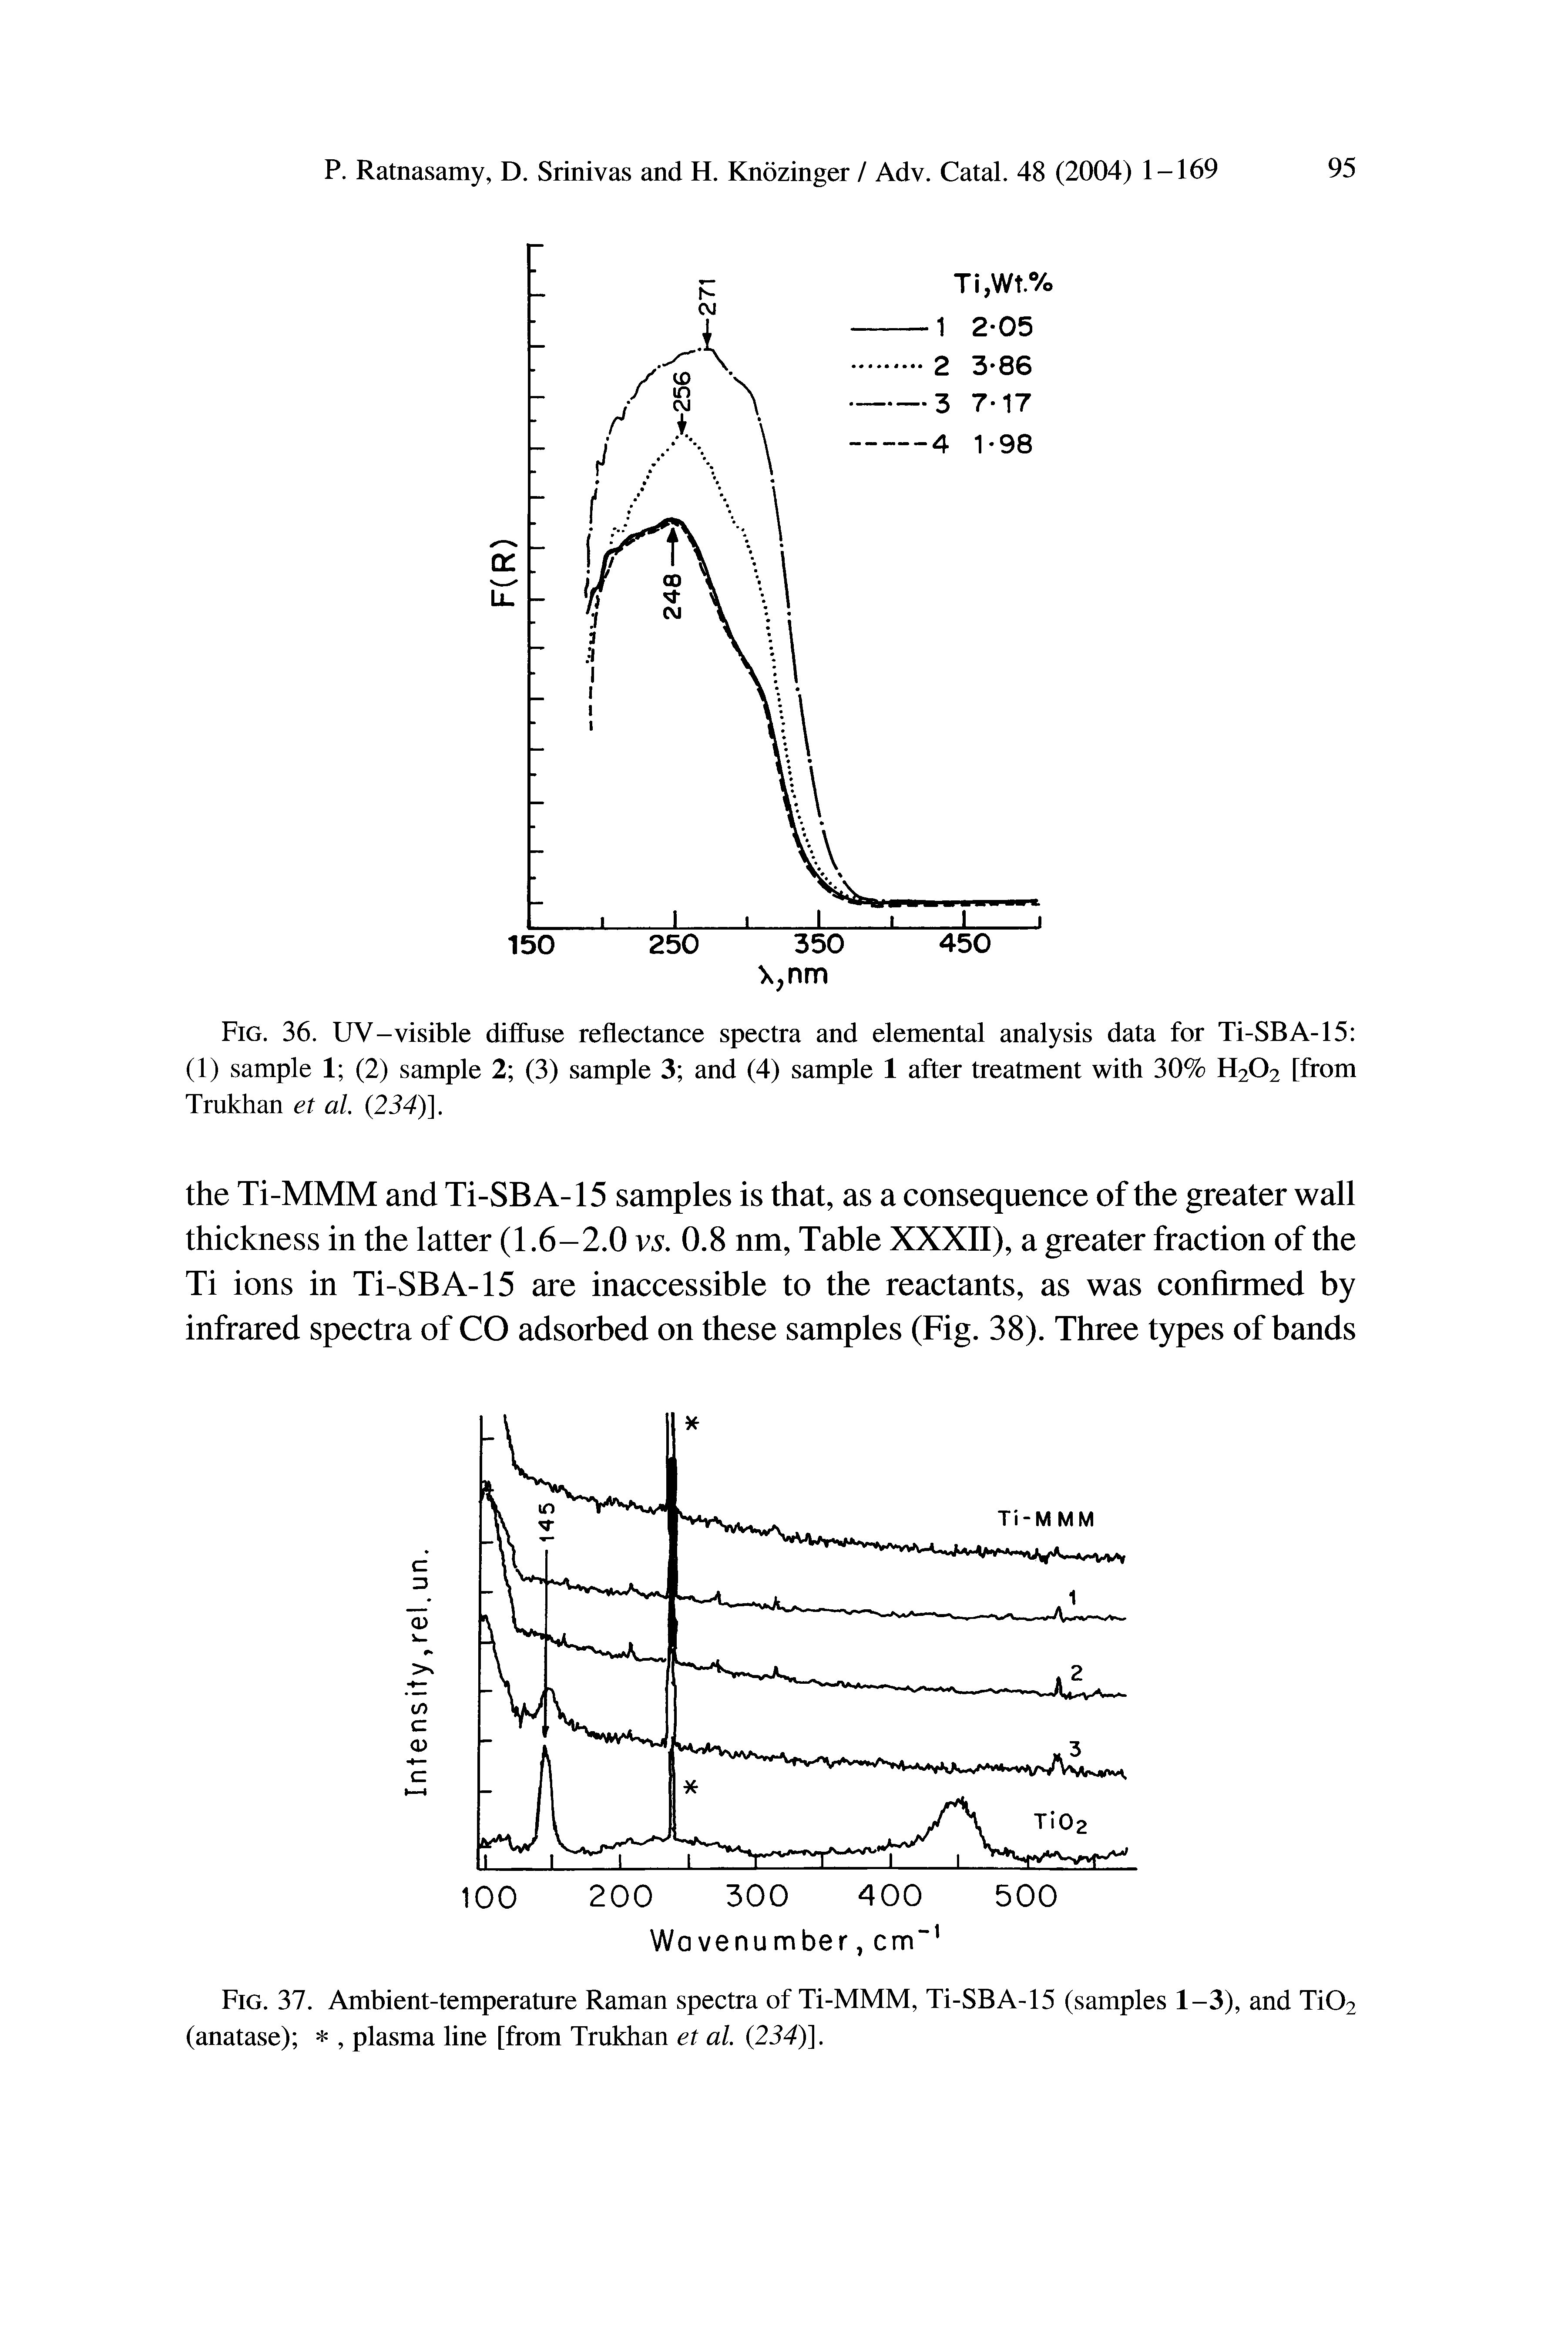 Fig. 36. UV-visible diffuse reflectance spectra and elemental analysis data for Ti-SBA-15 (1) sample 1 (2) sample 2 (3) sample 3 and (4) sample 1 after treatment with 30% H202 [from Trukhan et al. (234)].